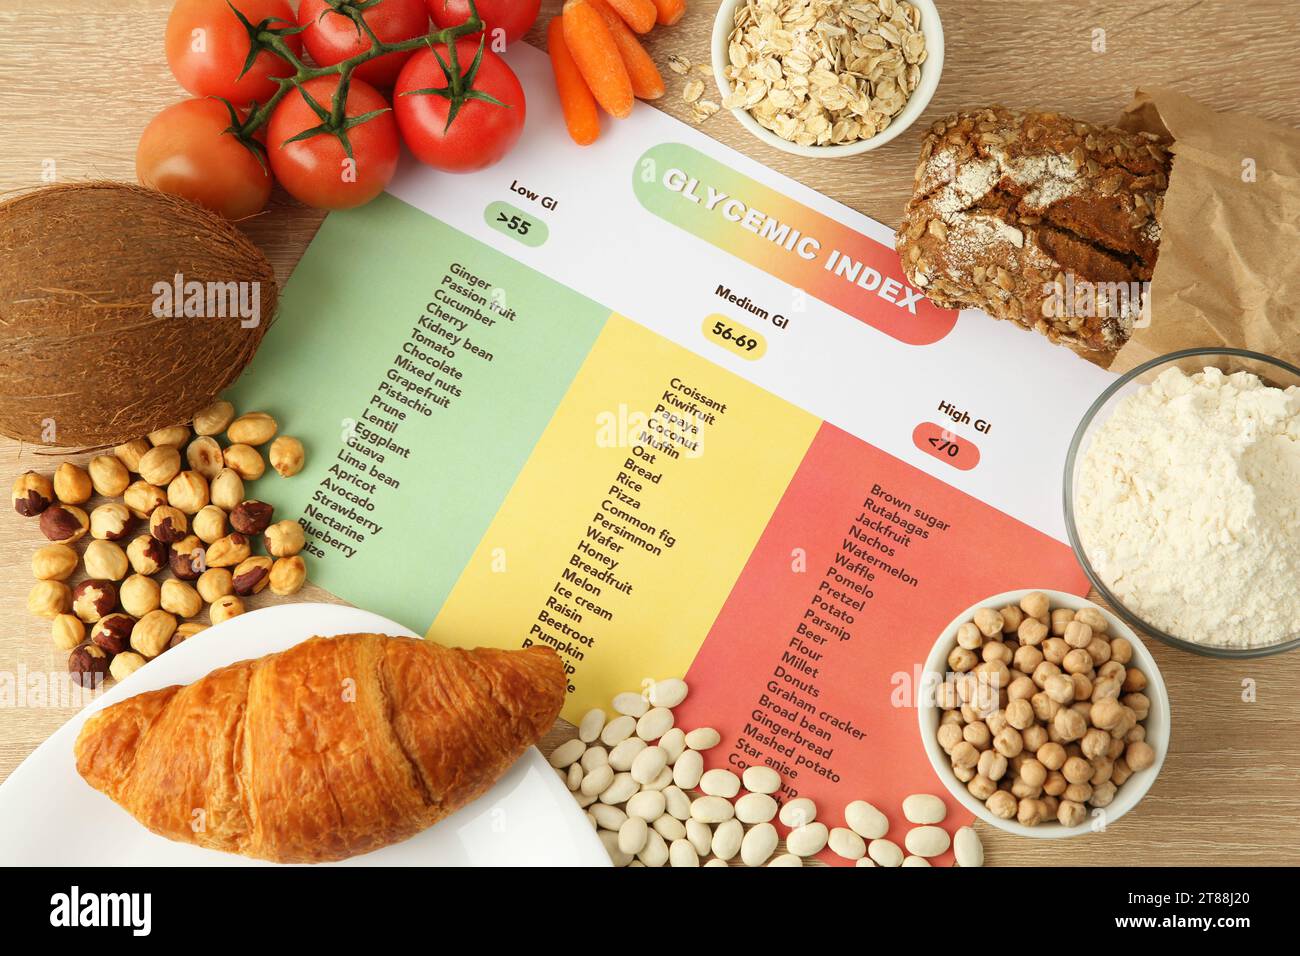 Glycemic index chart surrounded by different products on wooden table, flat lay Stock Photo